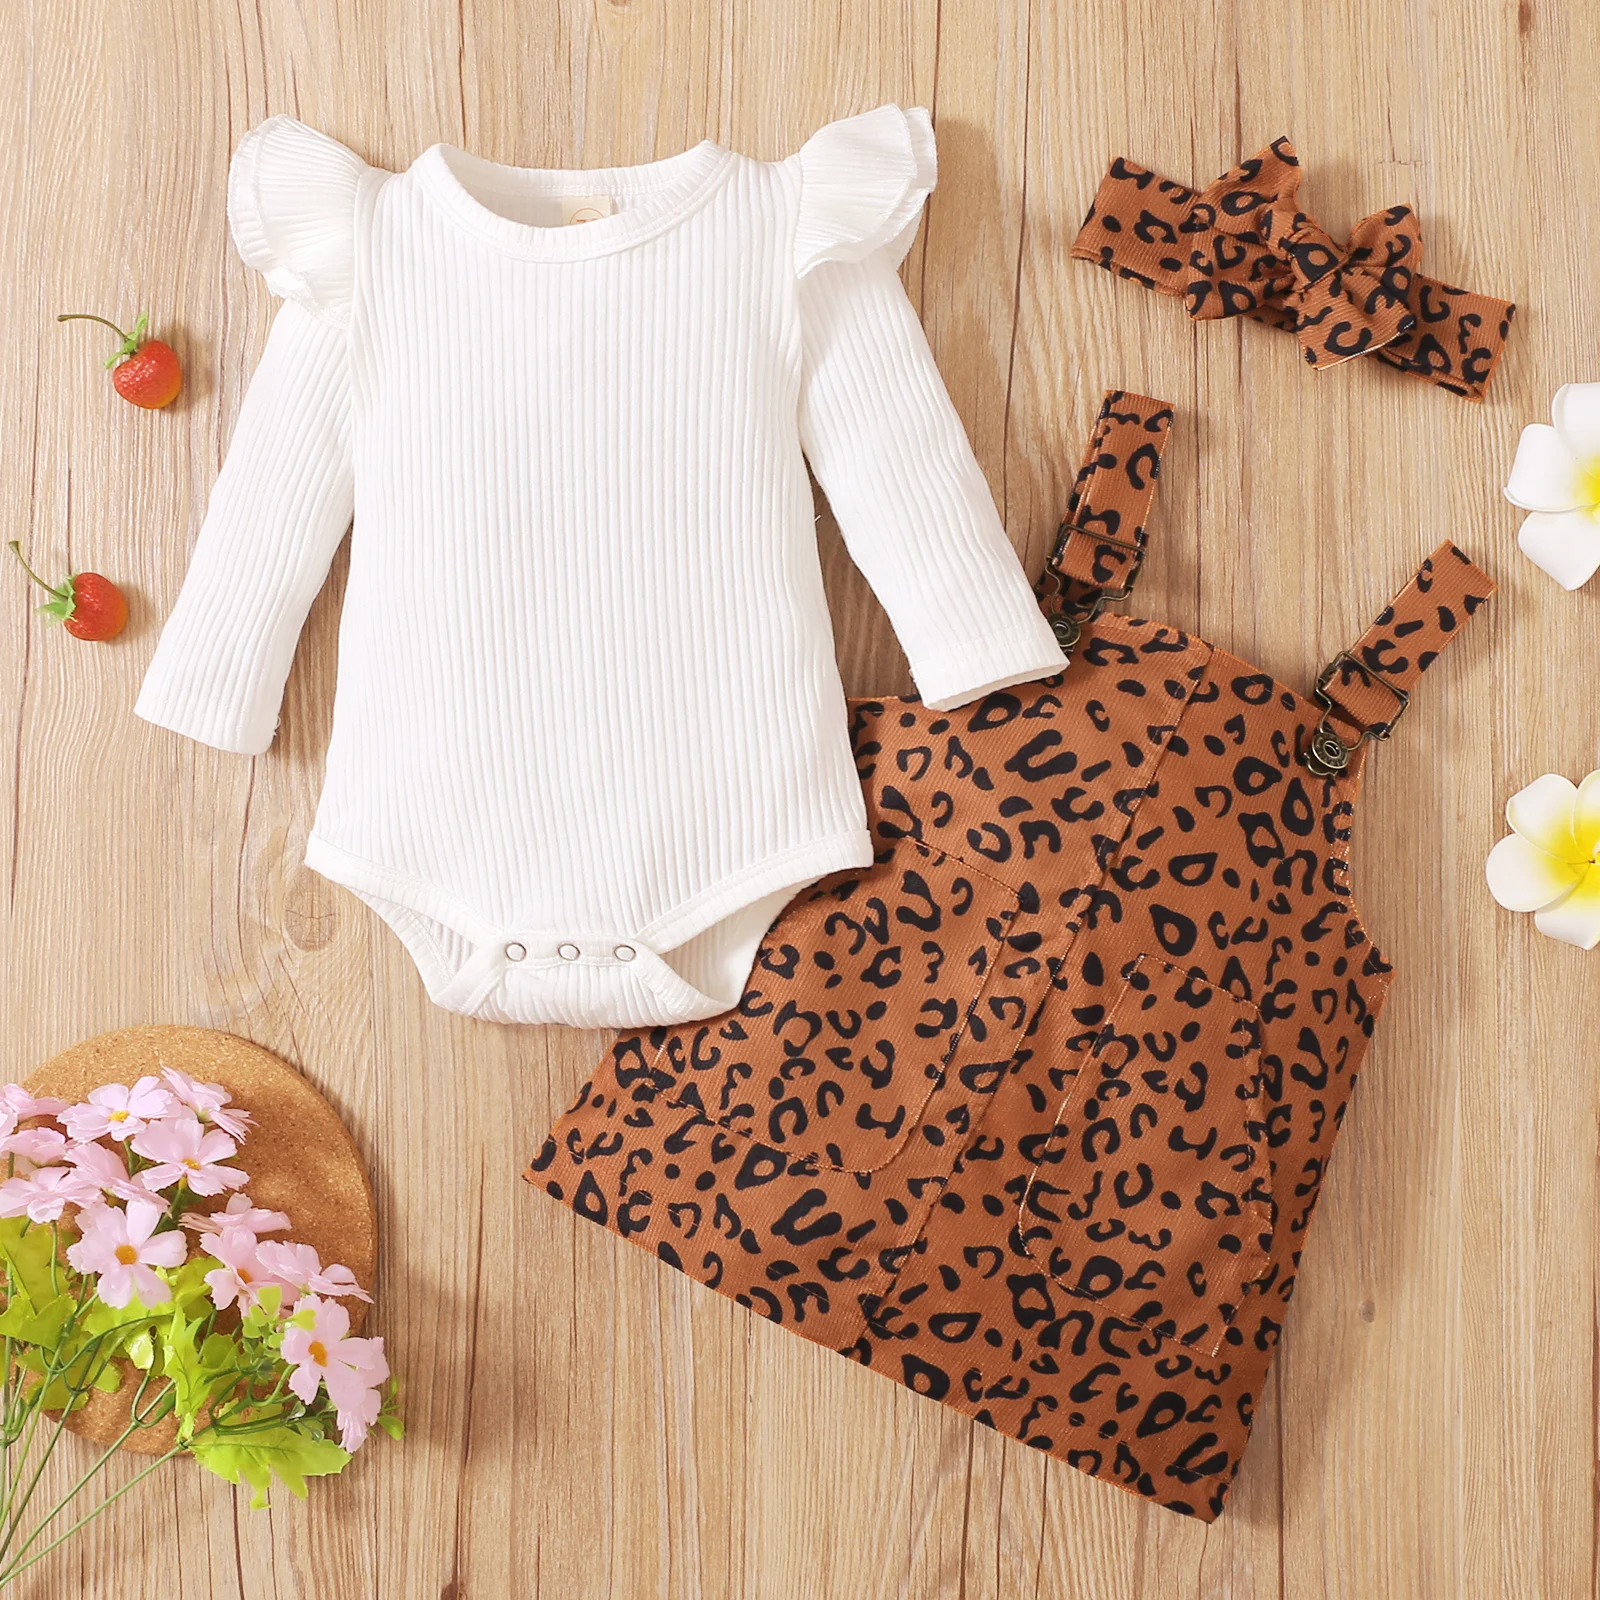 baby clothes penguin set Ma&Baby 0-18M Newborn Infant Baby Girls Clothes Set Ruffles Long Sleeve Rompers Leopard Strap Dress Autumn Spring Outfits D95 Baby Clothing Set medium